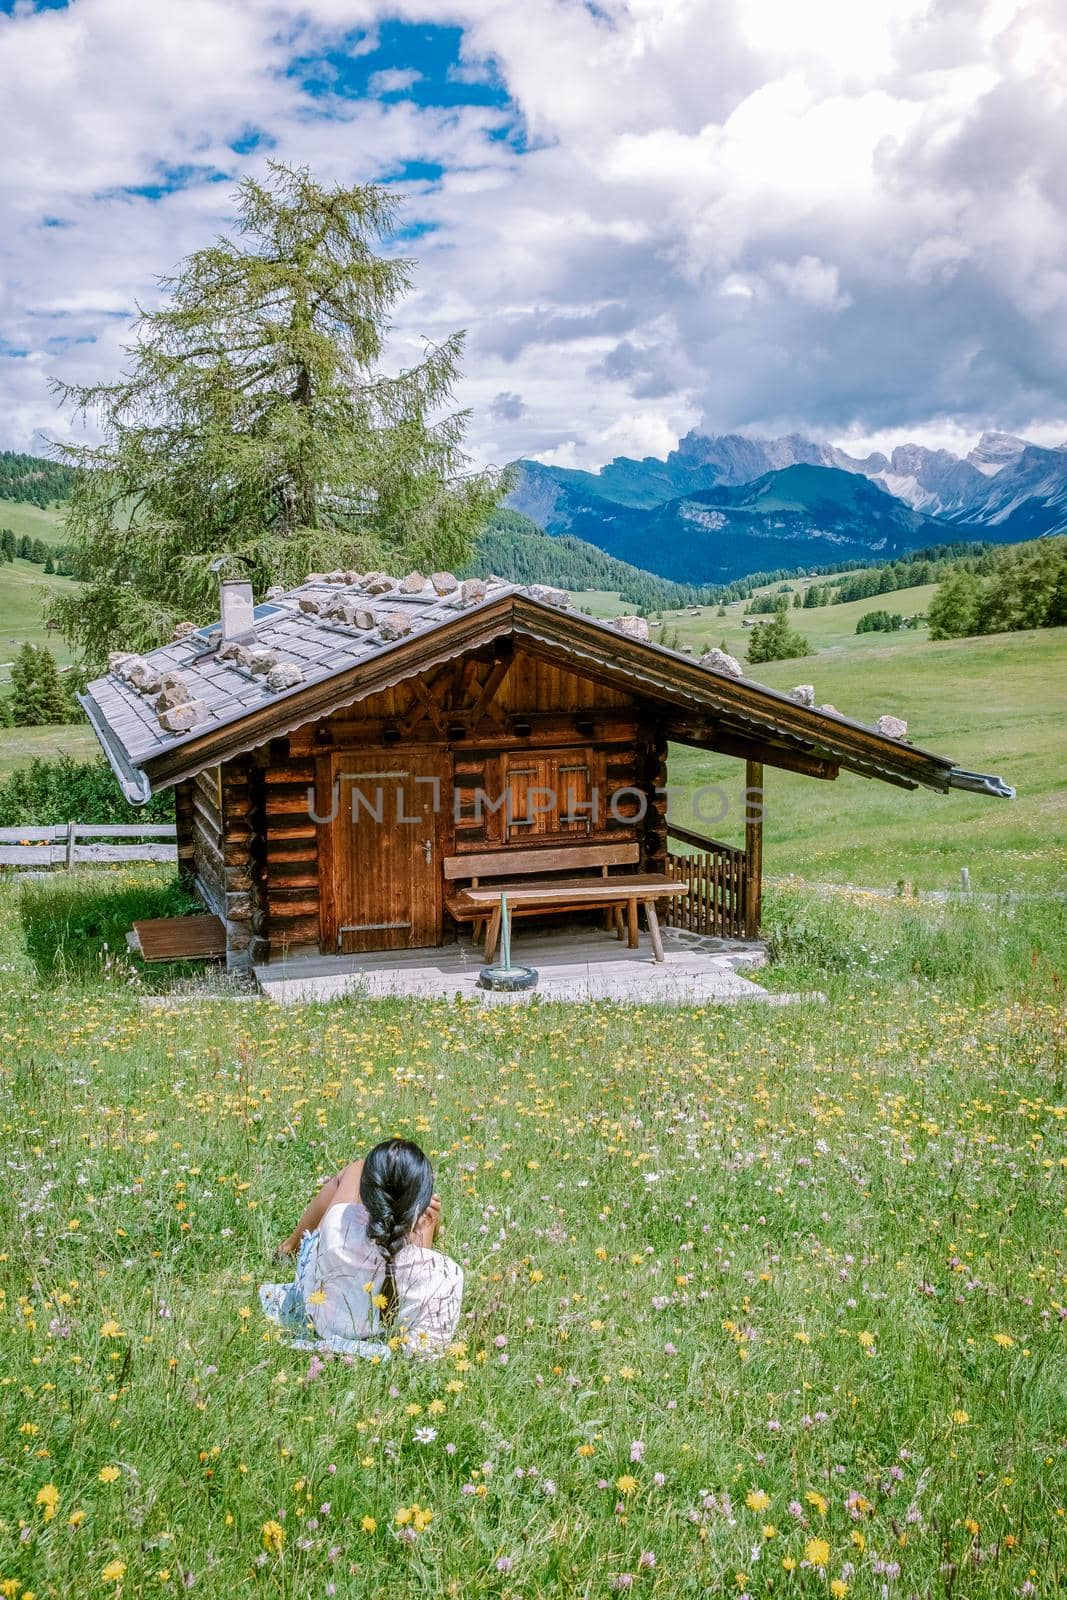  woman on vacation in the Dolomites Italy,Alpe di Siusi - Seiser AlmSouth Tyrol, Italy by fokkebok